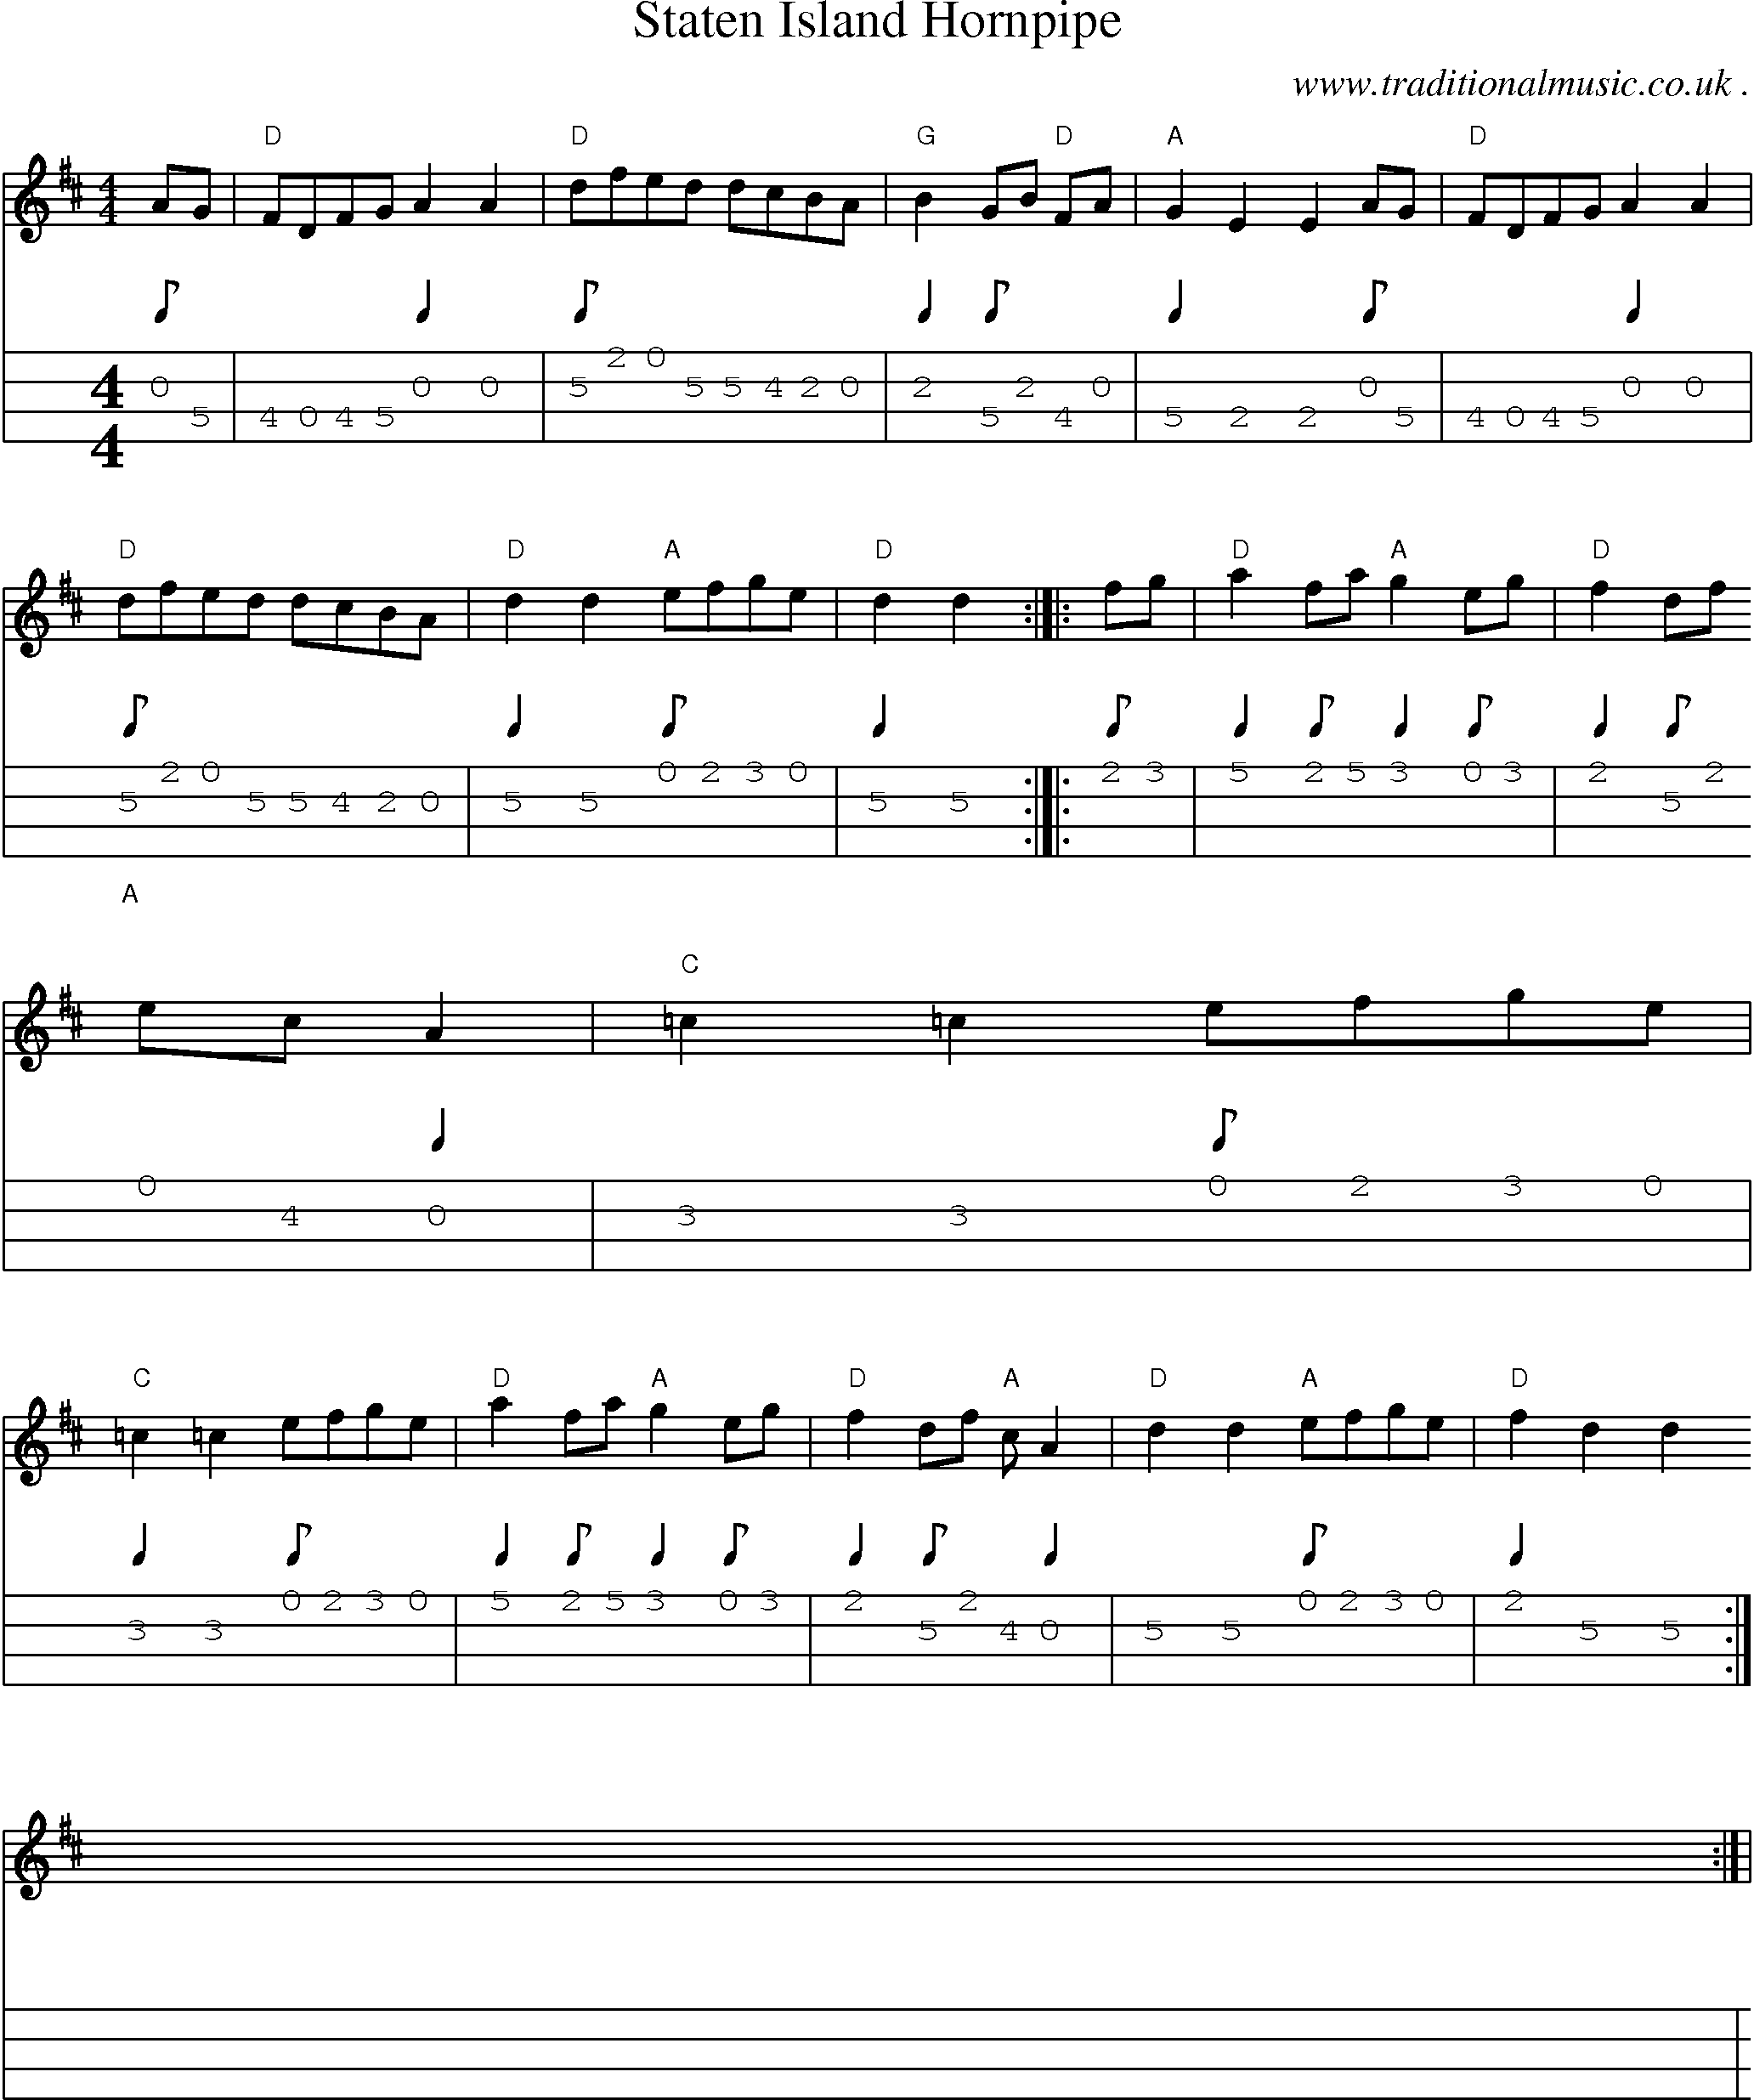 Music Score and Guitar Tabs for Staten Island Hornpipe